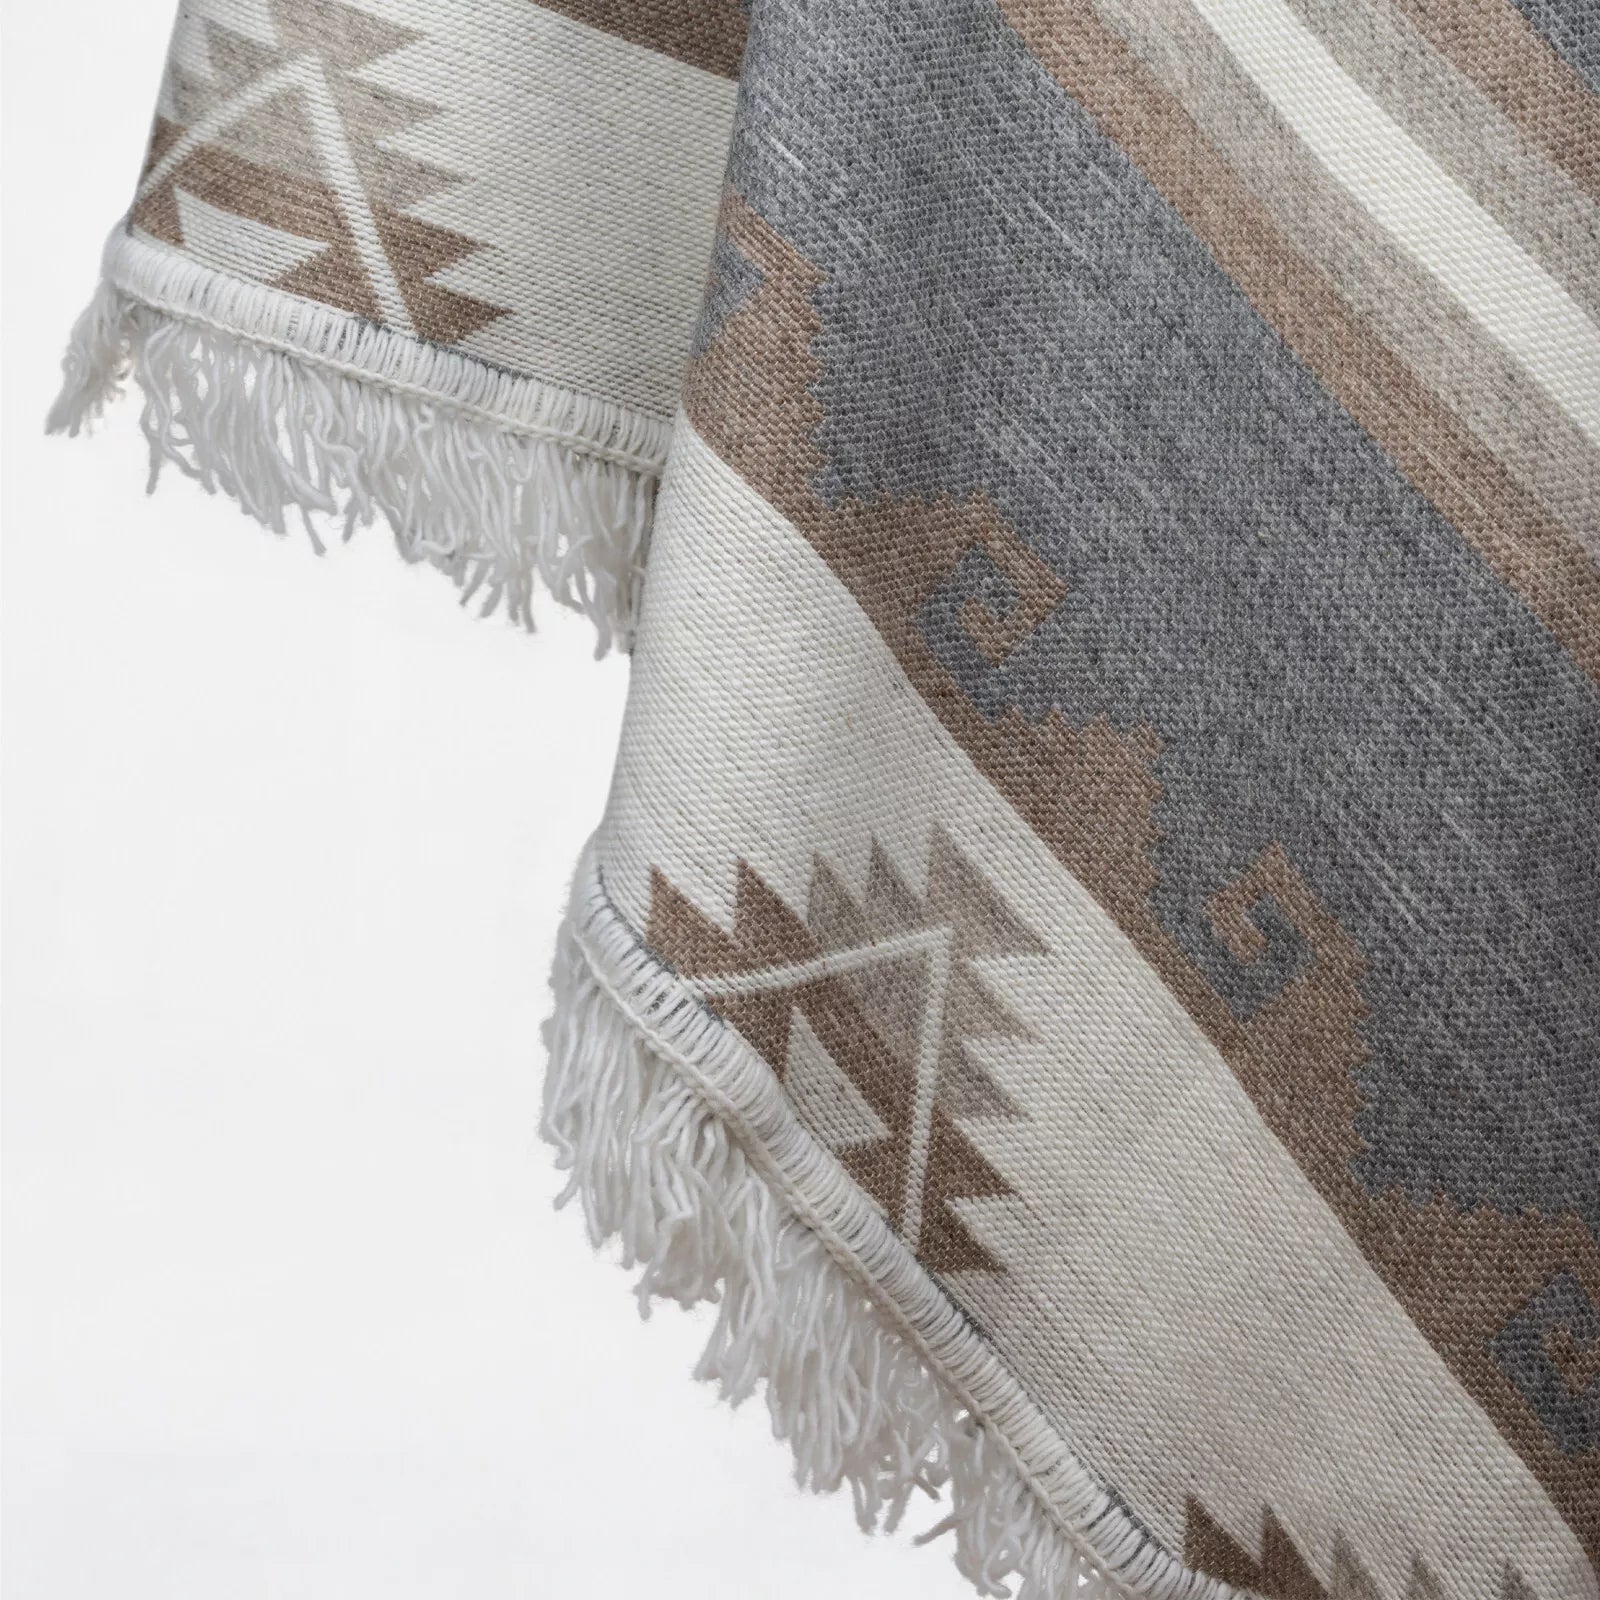 Antikuna - Llama Wool Unisex V-Shaped S. American Handwoven Thick Hooded Poncho - Andean pattern - gray/earth tones